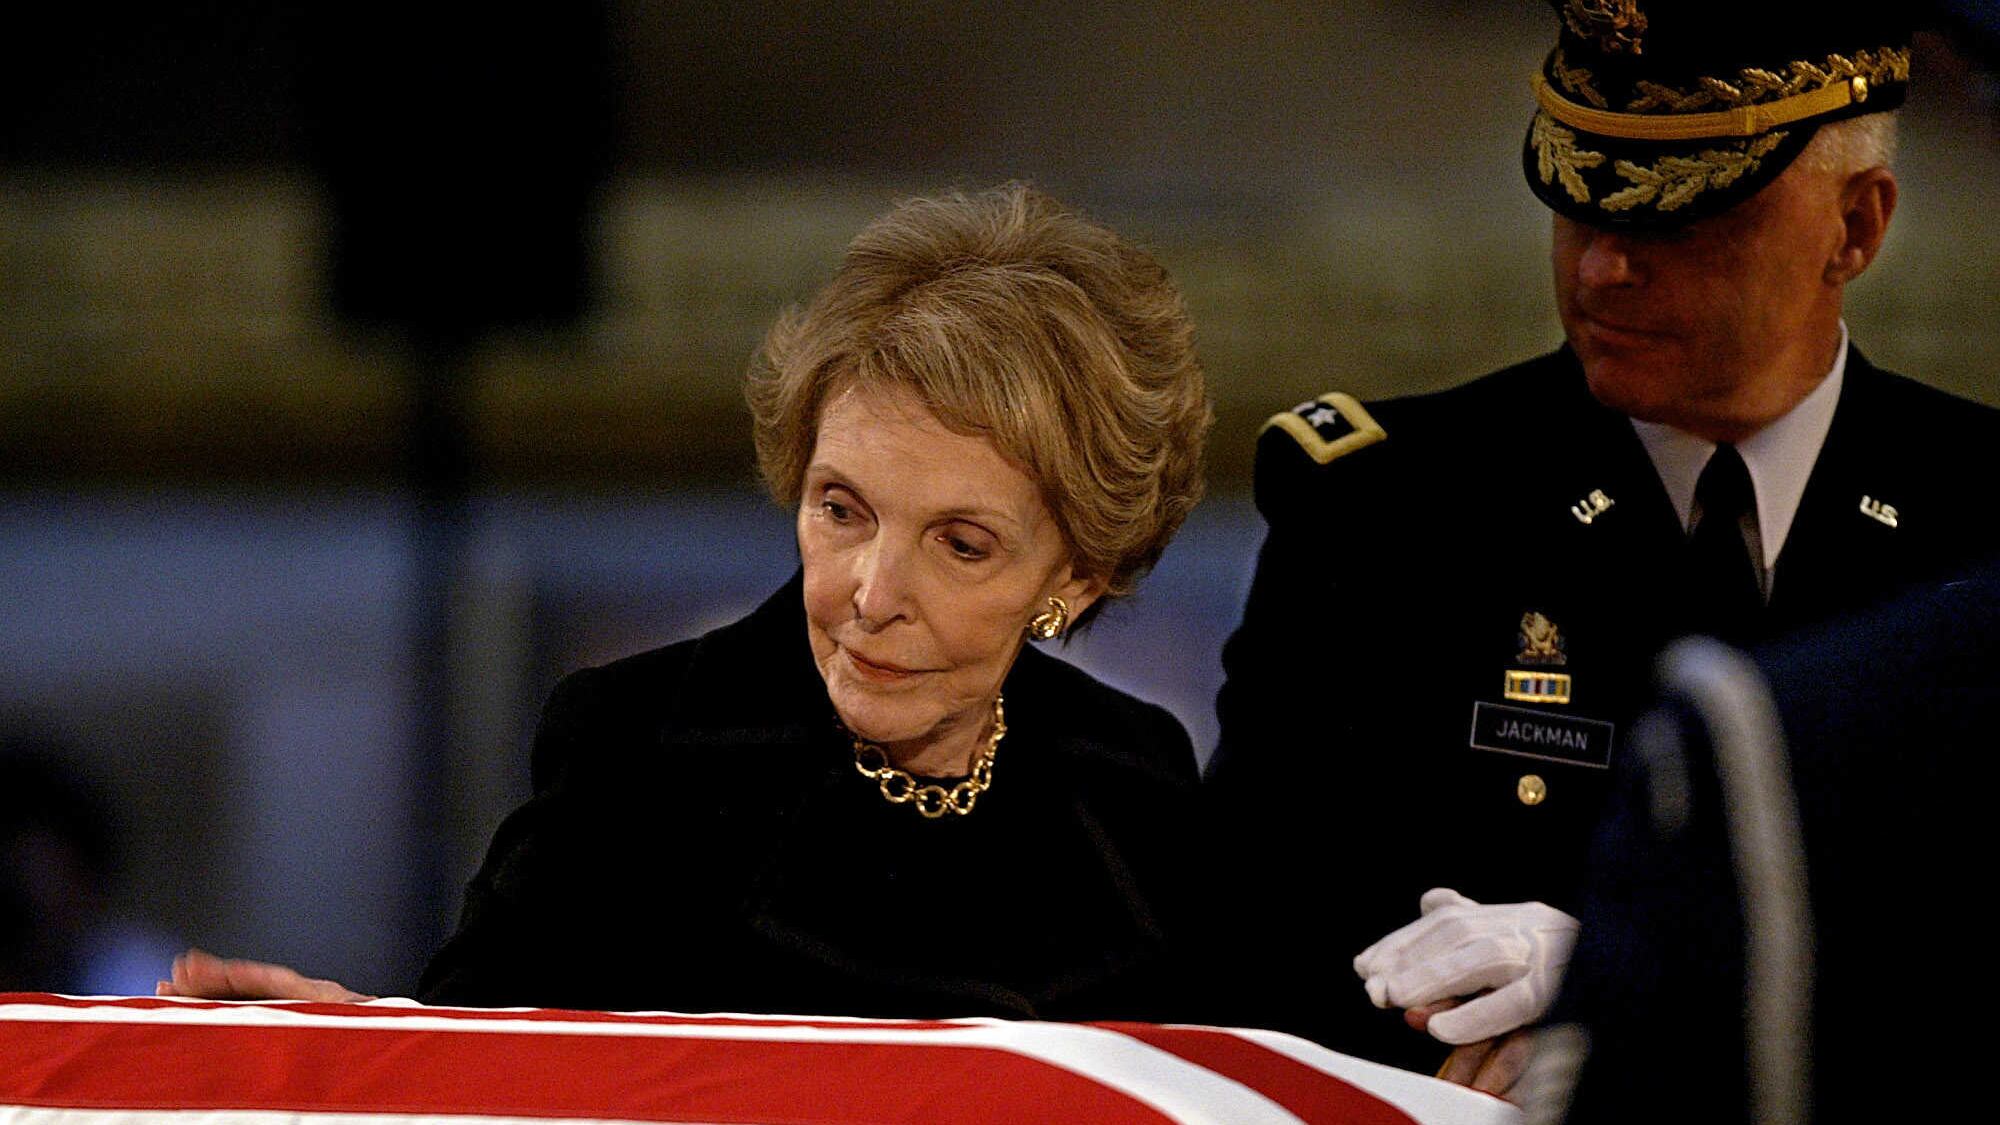 Former first lady Nancy Reagan says goodbye to her husband, former President Ronald Reagan, shortly before his body was removed from the Rotunda of the US Capitol in Washington in June 2004